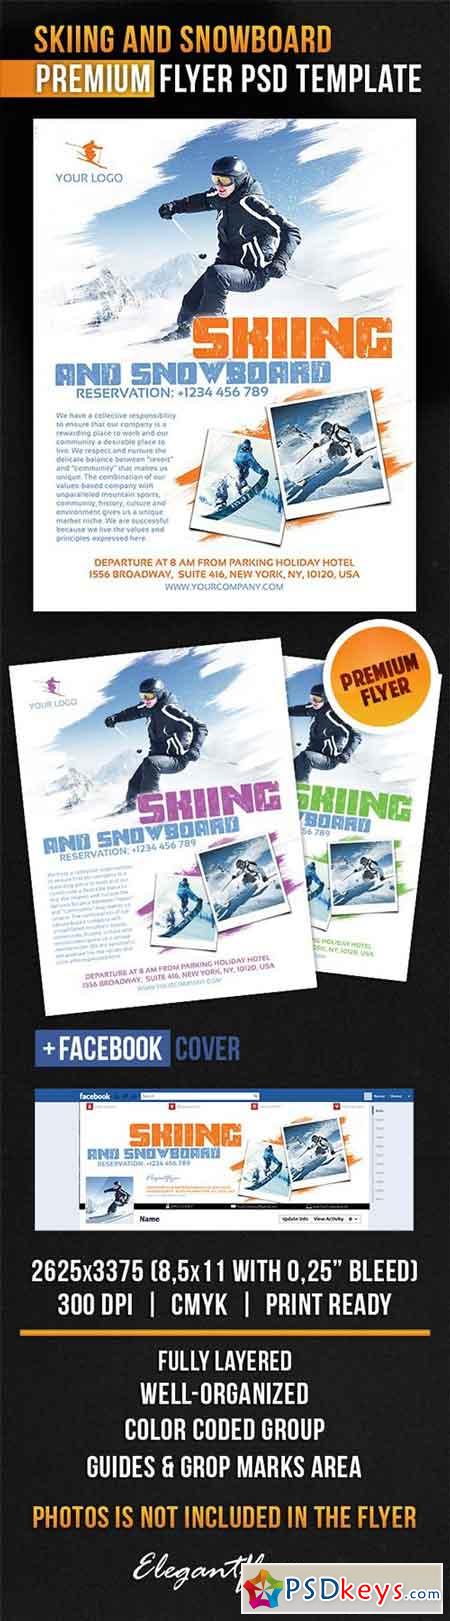 Skiing And Snowboard Flyer PSD Template + Facebook Cover